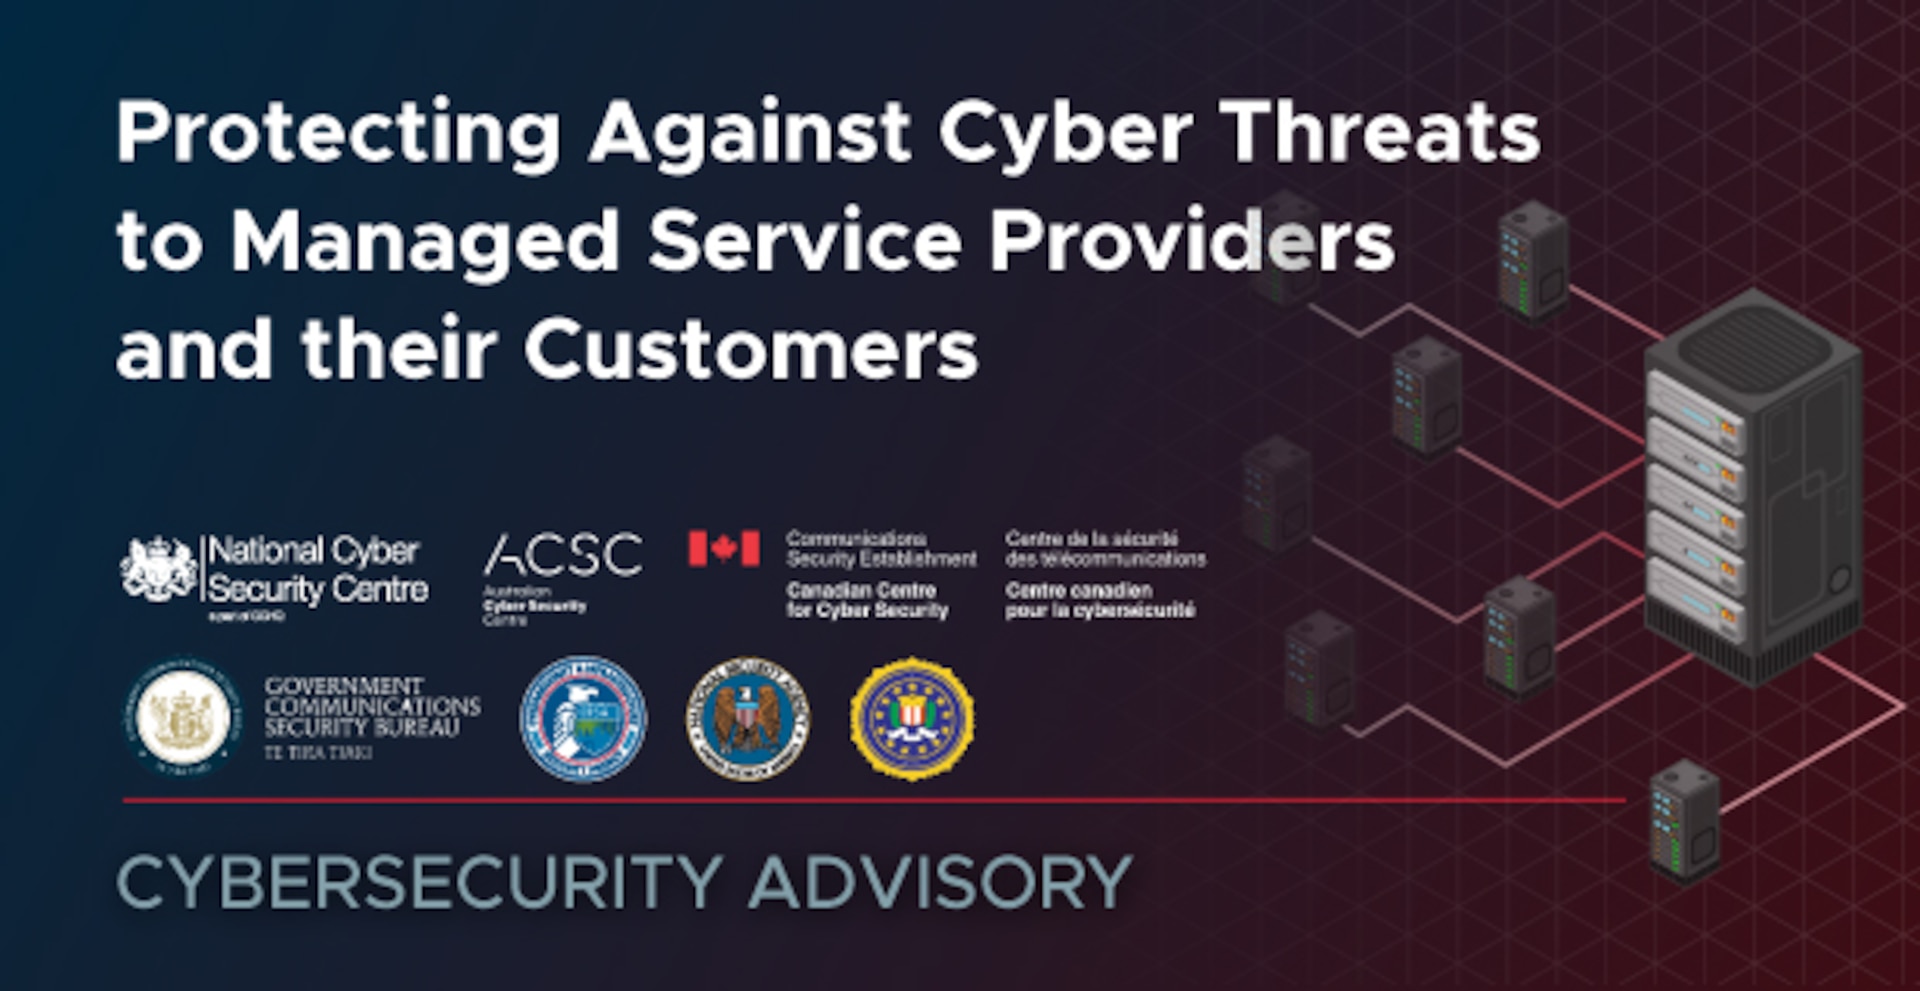 NSA, Partners Issue Guidance to Secure Managed Service Providers, Their Customers